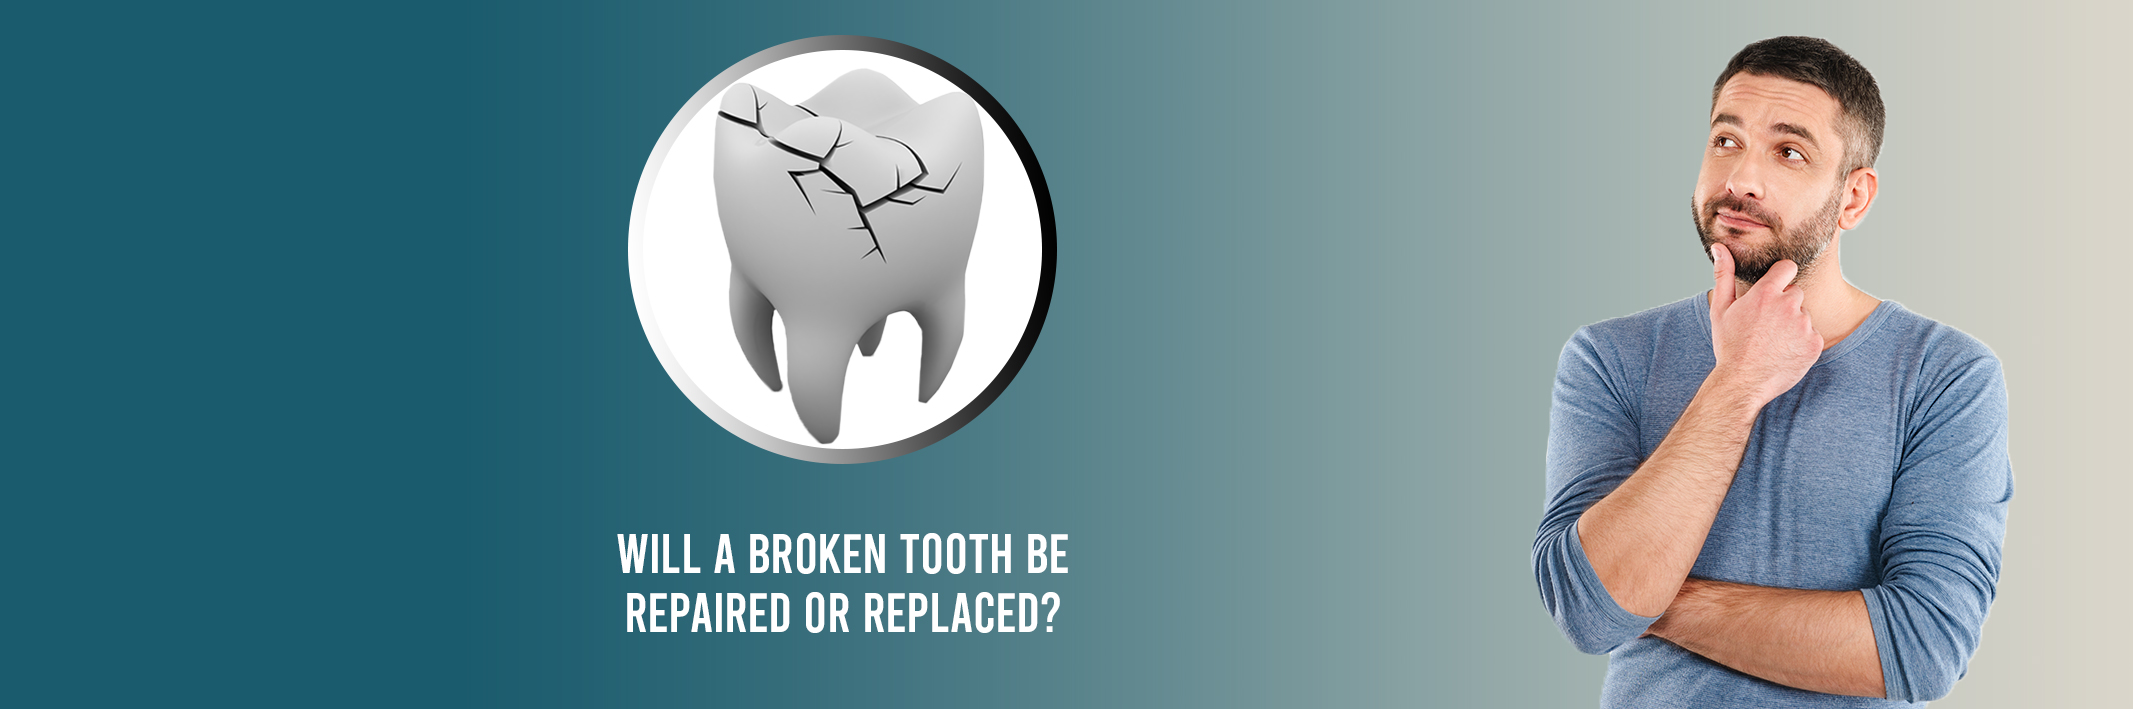 Will a Broken Tooth Be Repaired or Replaced?